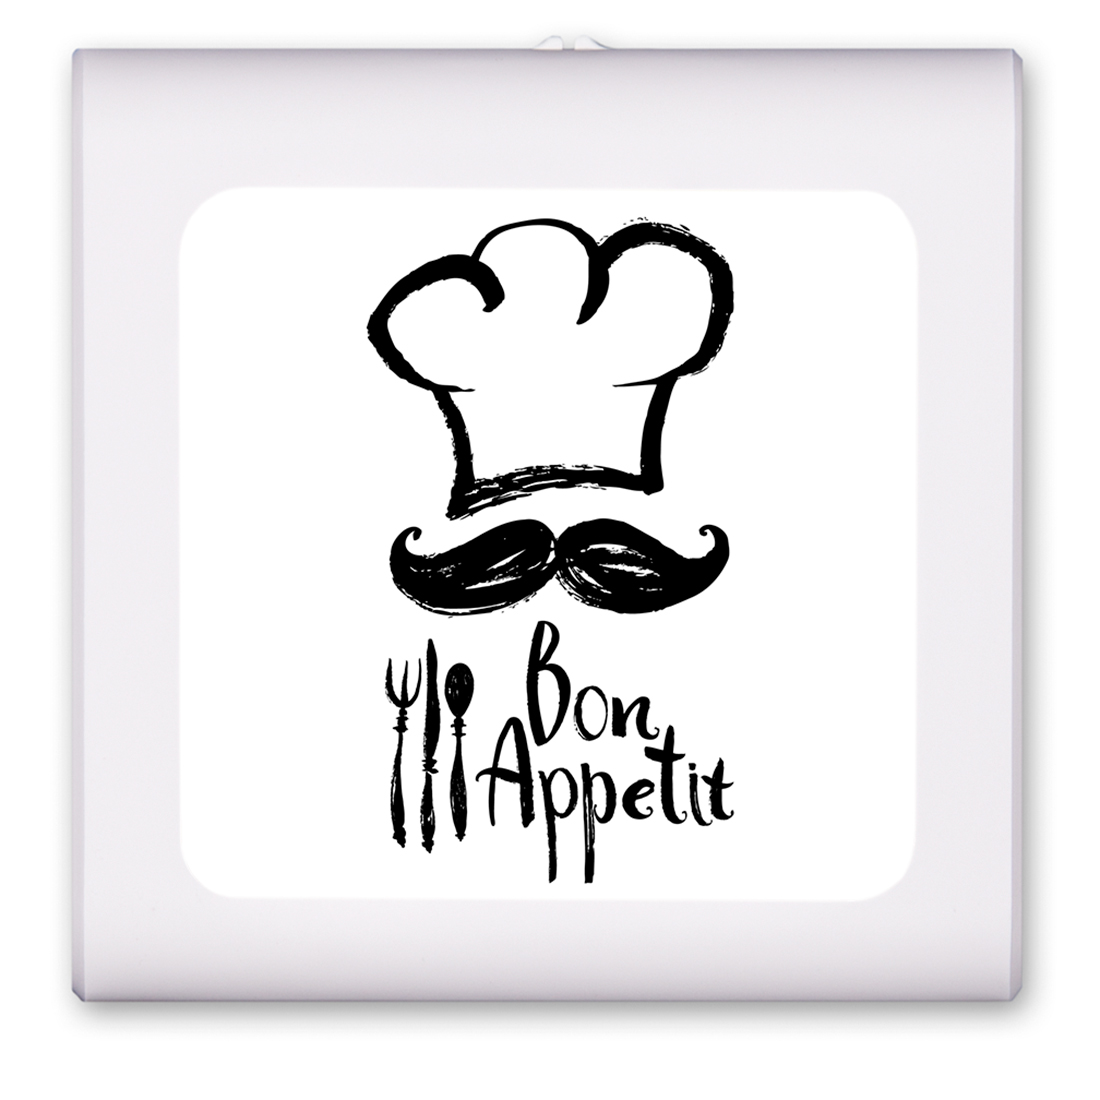 Bon Appetite and Chefs Hat - #8676